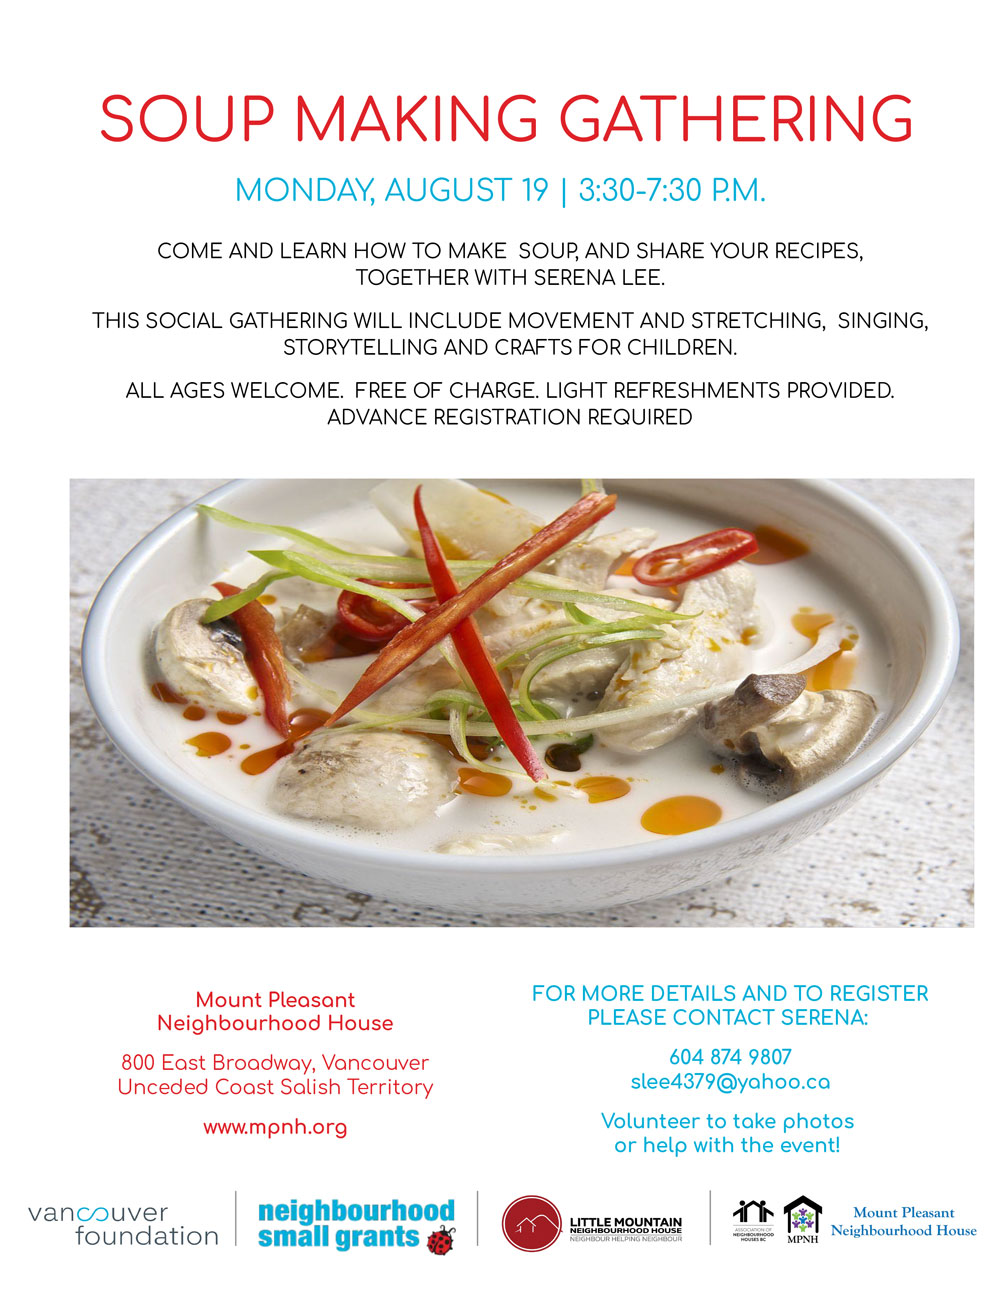 An image of the event poster with a photo of a bowl of soup with vegetables.